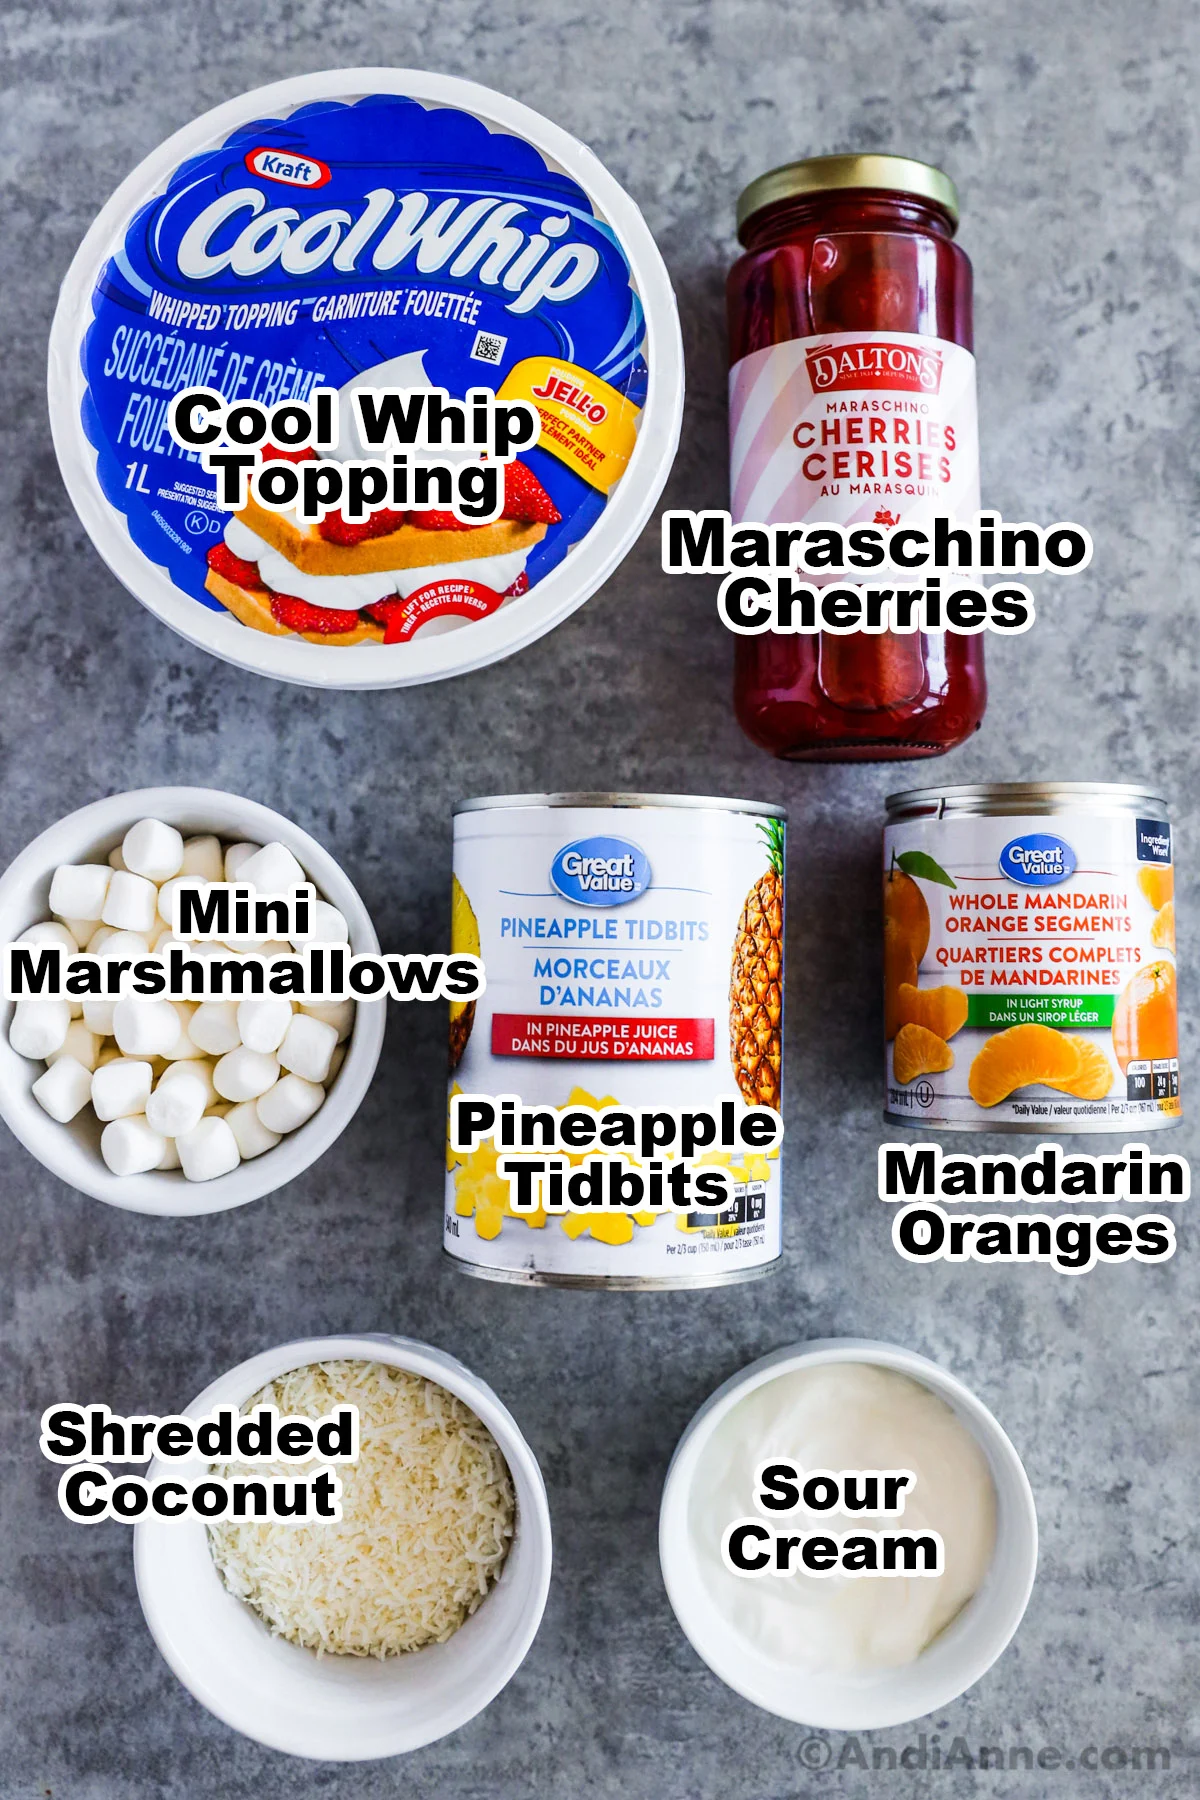 Recipe ingredients on counter including cool whip container, jar of maraschino cherries, mini marshmallows, canned pineapple and mandarin oranges, shredded coconut and sour cream.